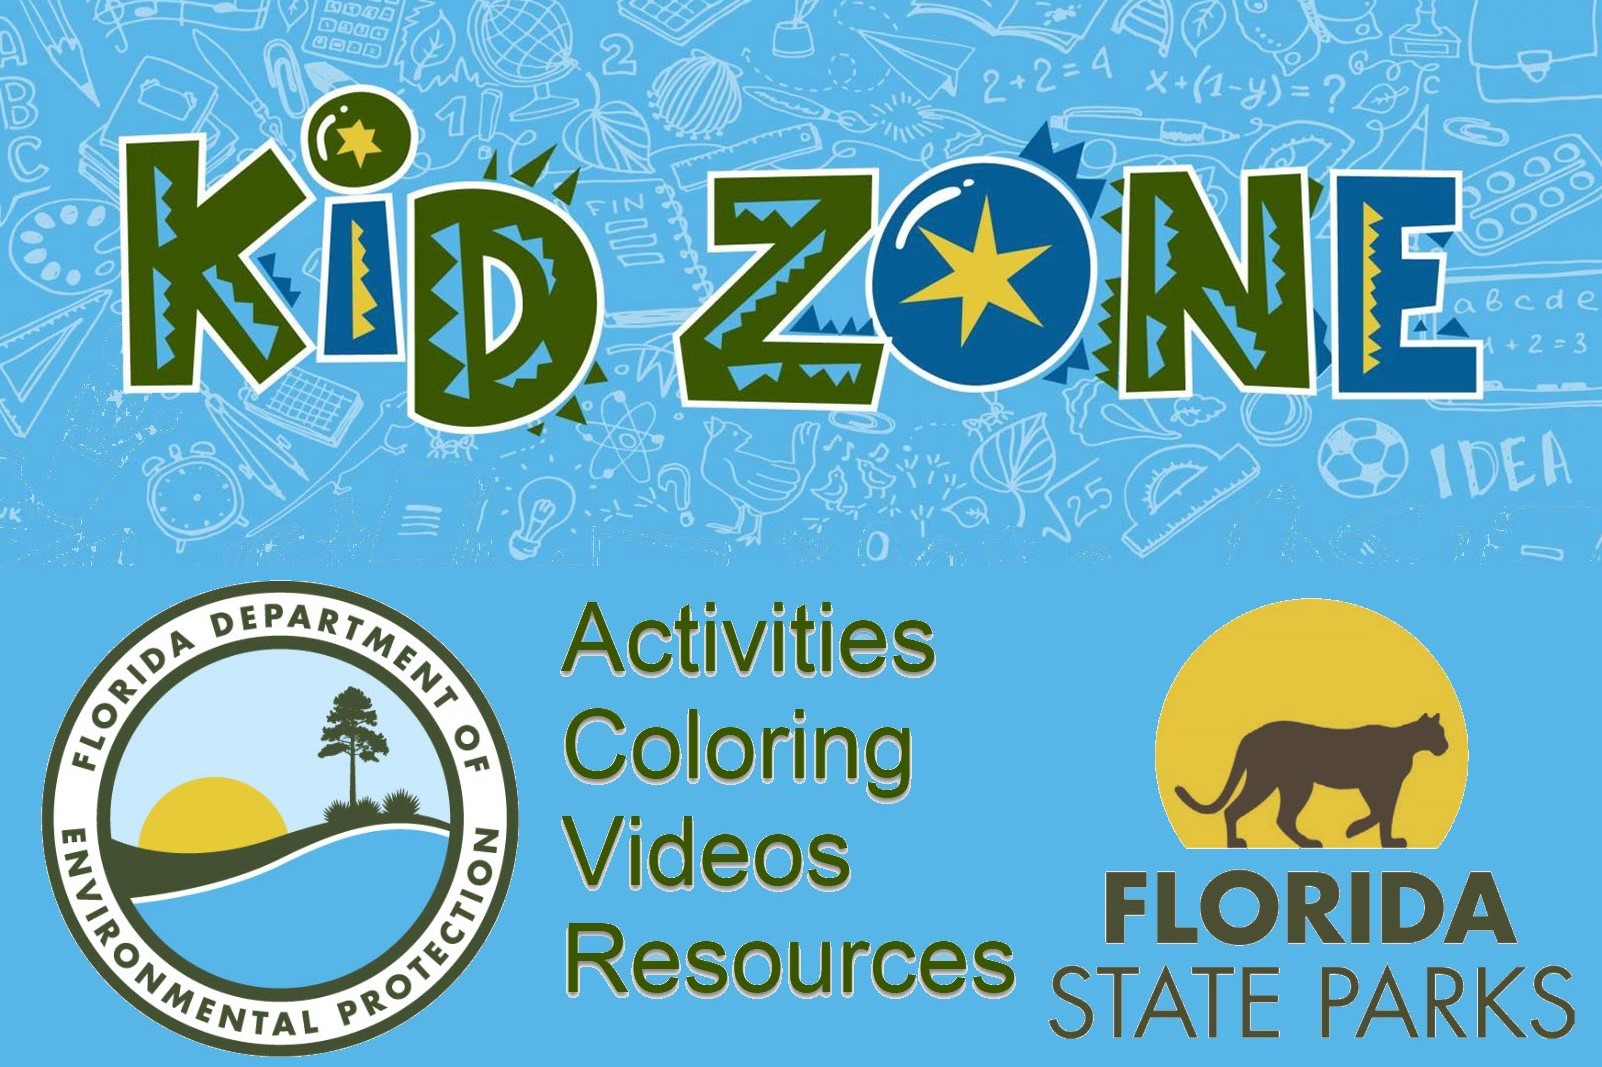 Kid Zone icon, includes activities coloring, videos, resources